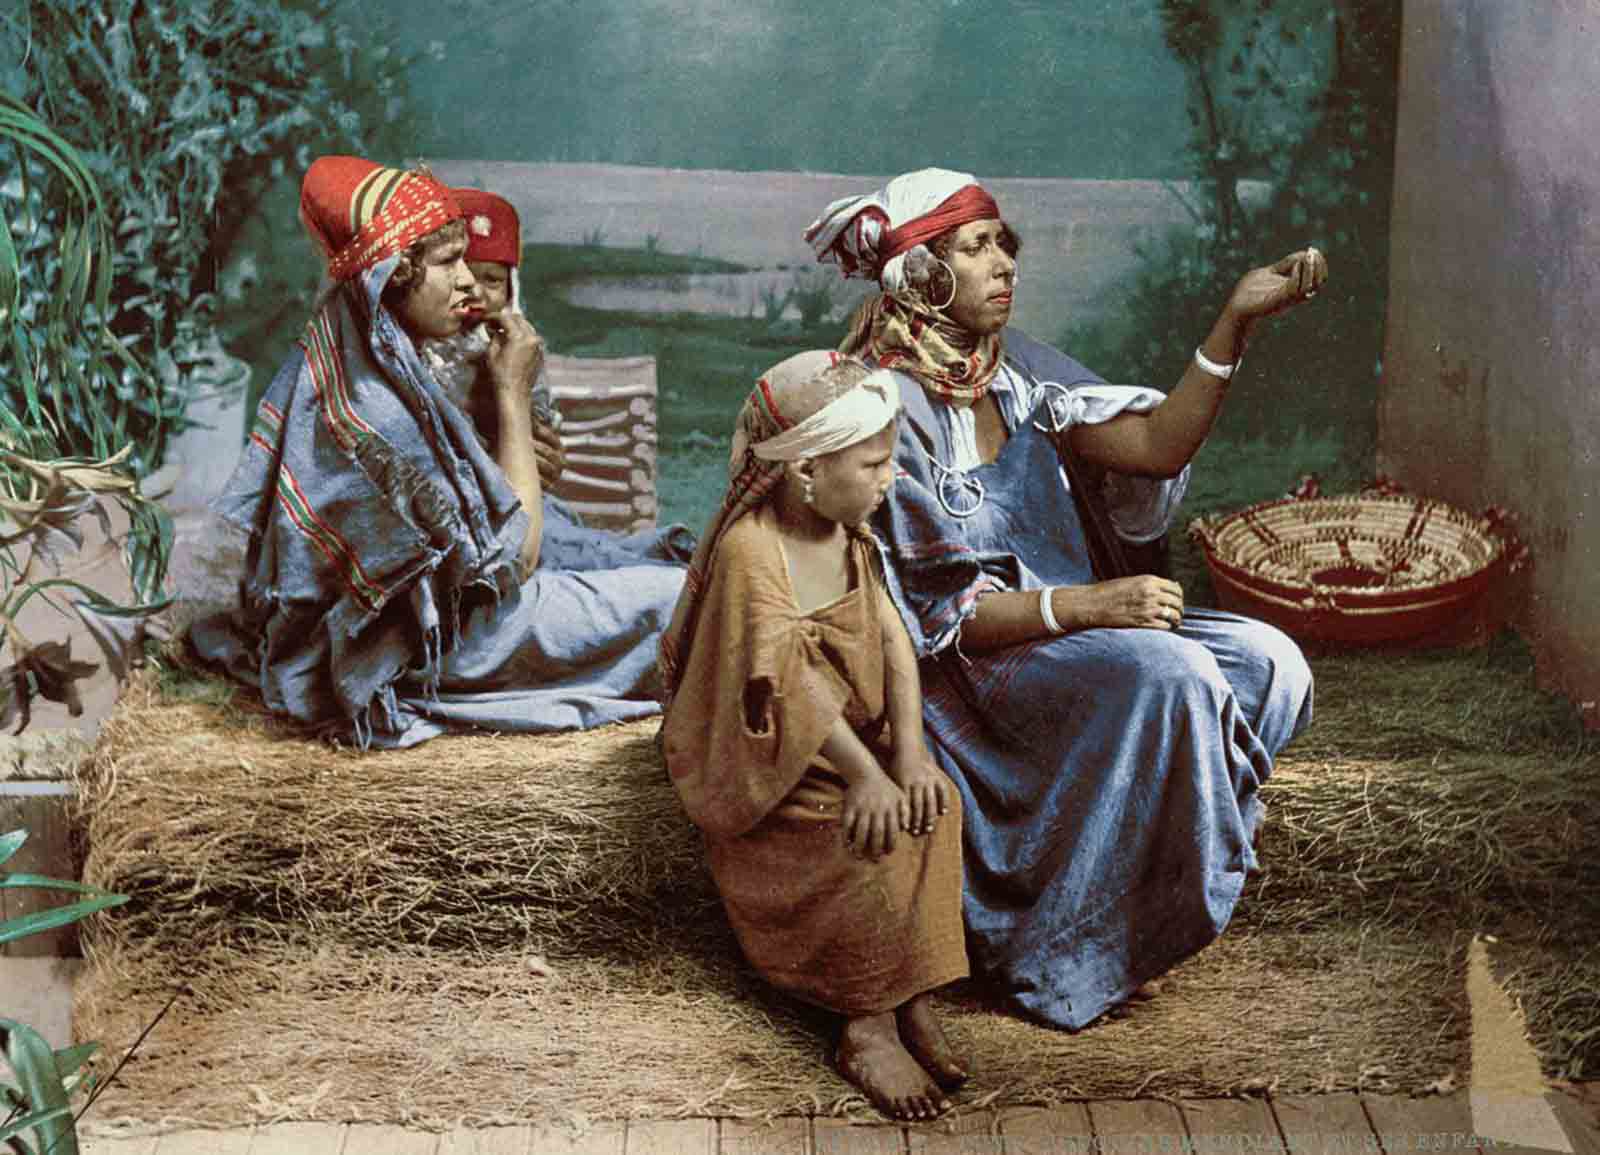 A family of Bedouin beggars, Tunis.